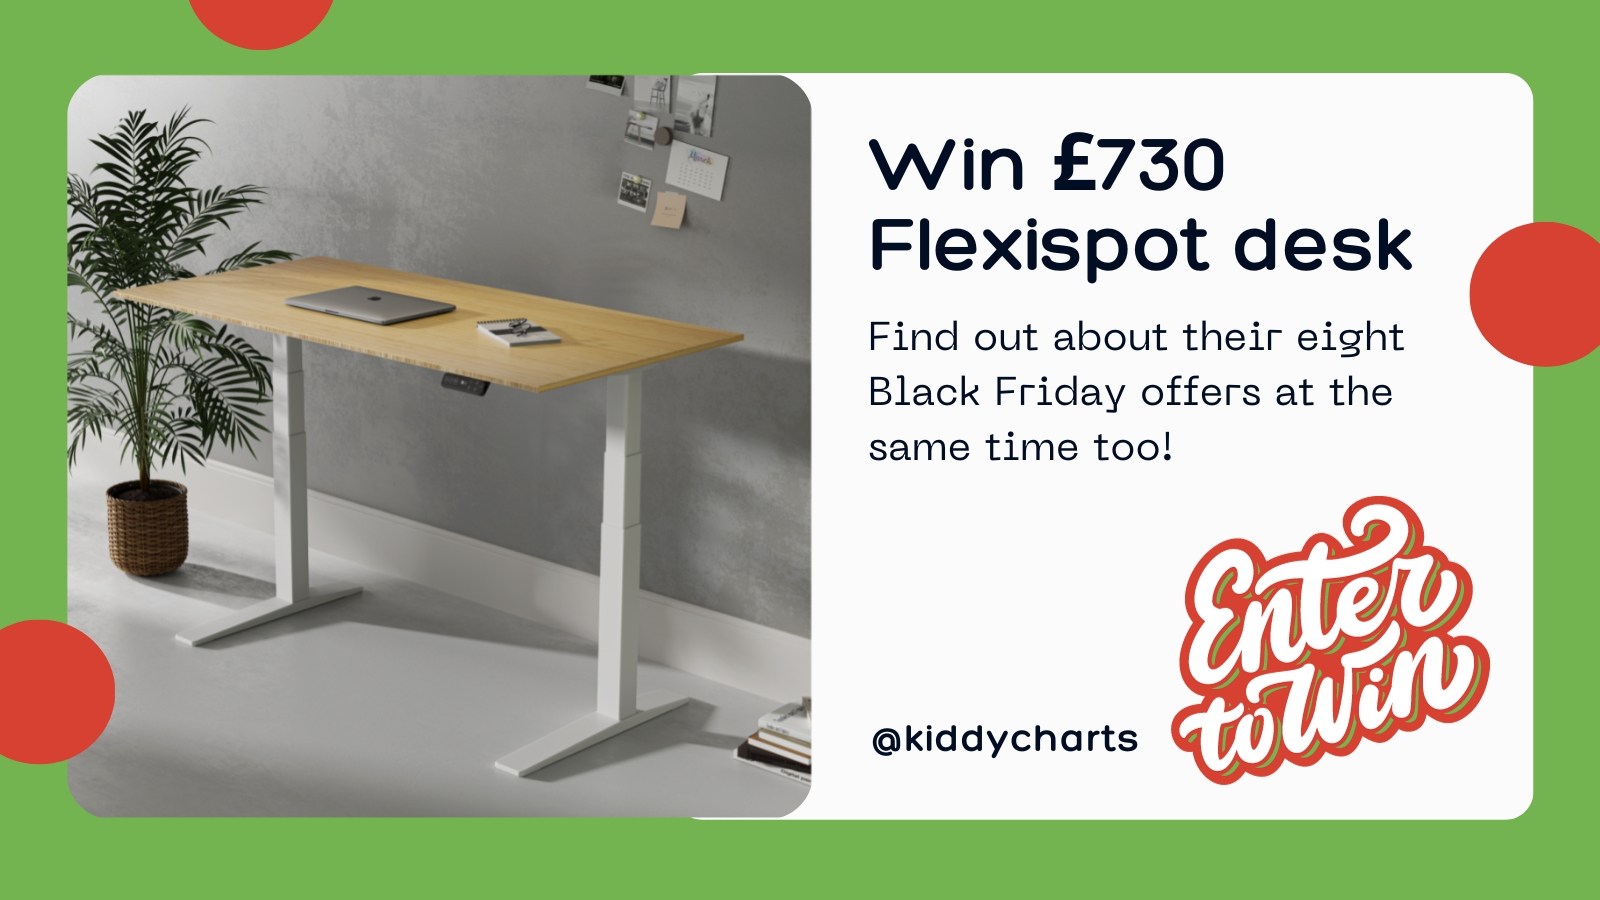 Win a £730 Flexispot desk to celebrate all these amazing Black Friday offers